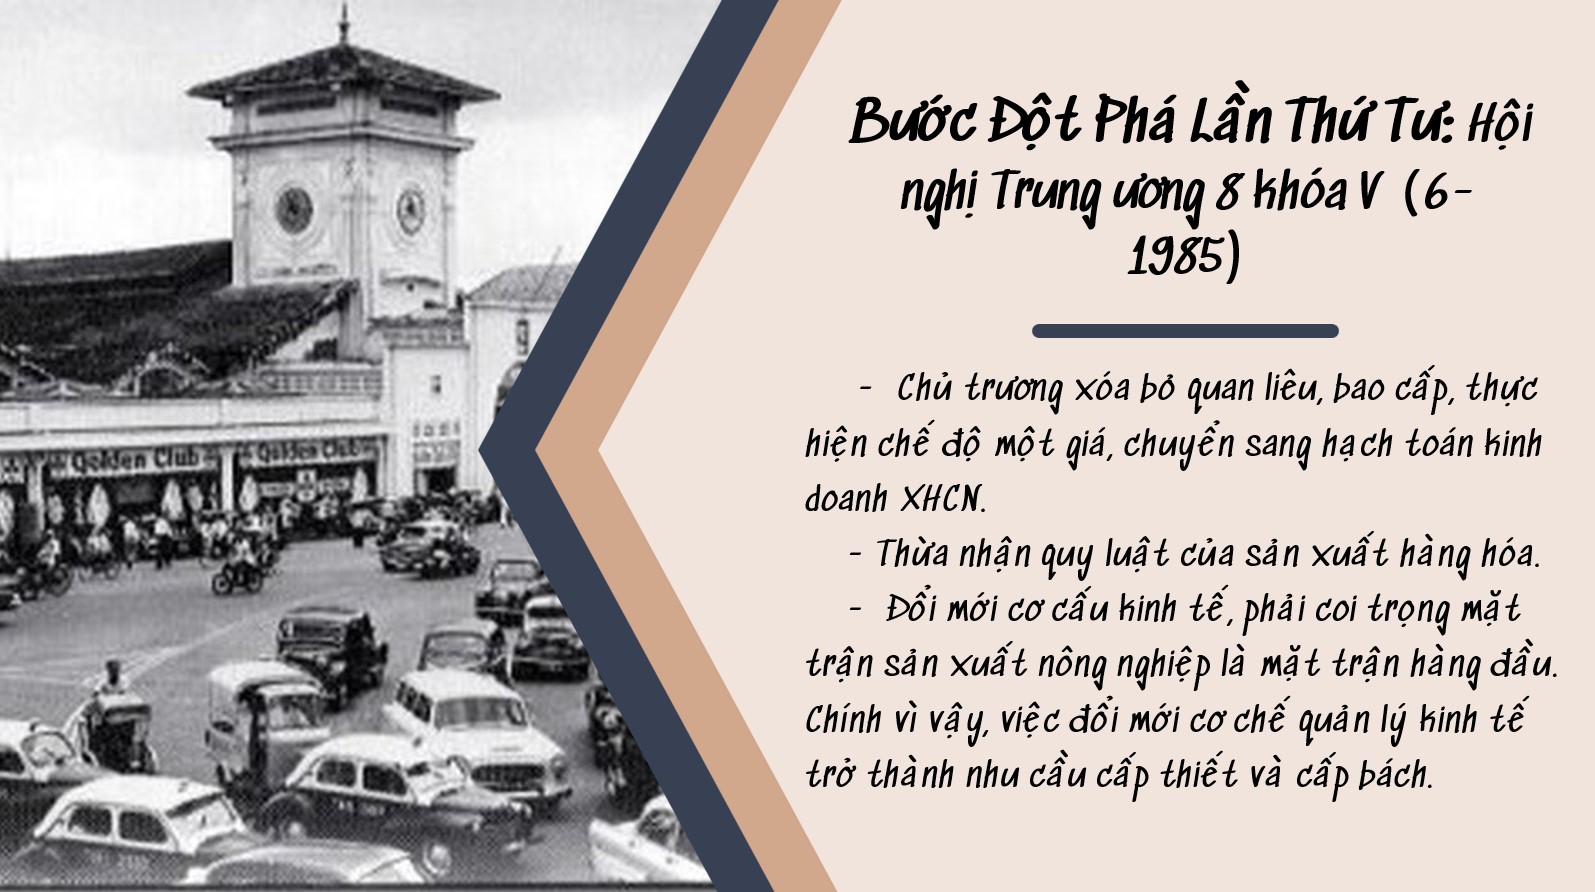 Có thể tải thư viện mẫu slide powerpoint lịch sử đảng Việt Nam ở đâu? (Where can I download a library of sample powerpoint slides for the history of the Vietnamese Communist Party?)